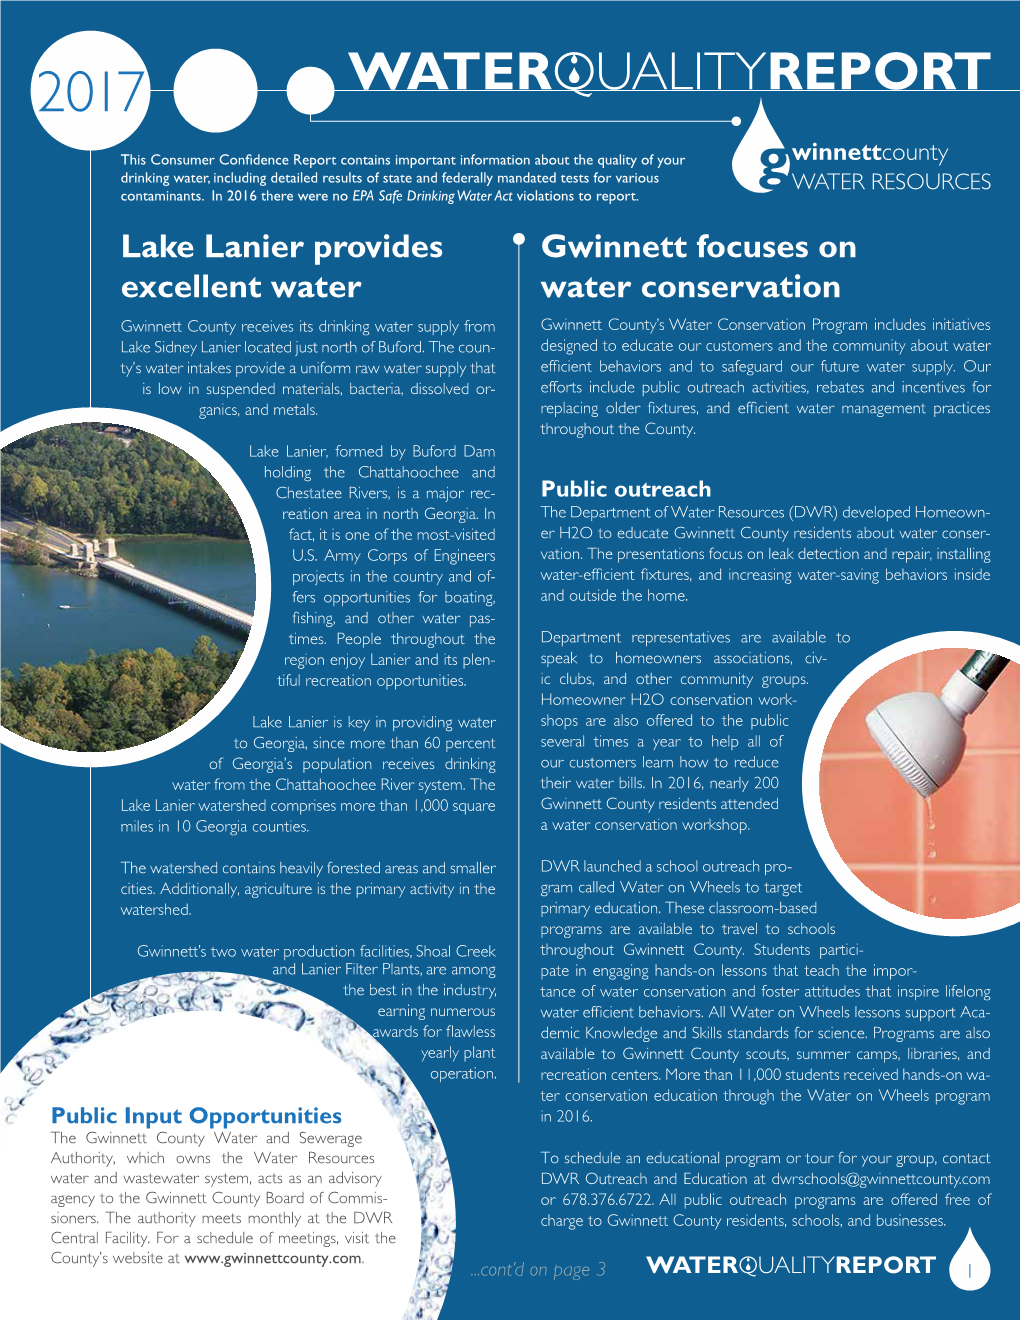 Lake Lanier Provides Excellent Water Gwinnett Focuses on Water Conservation